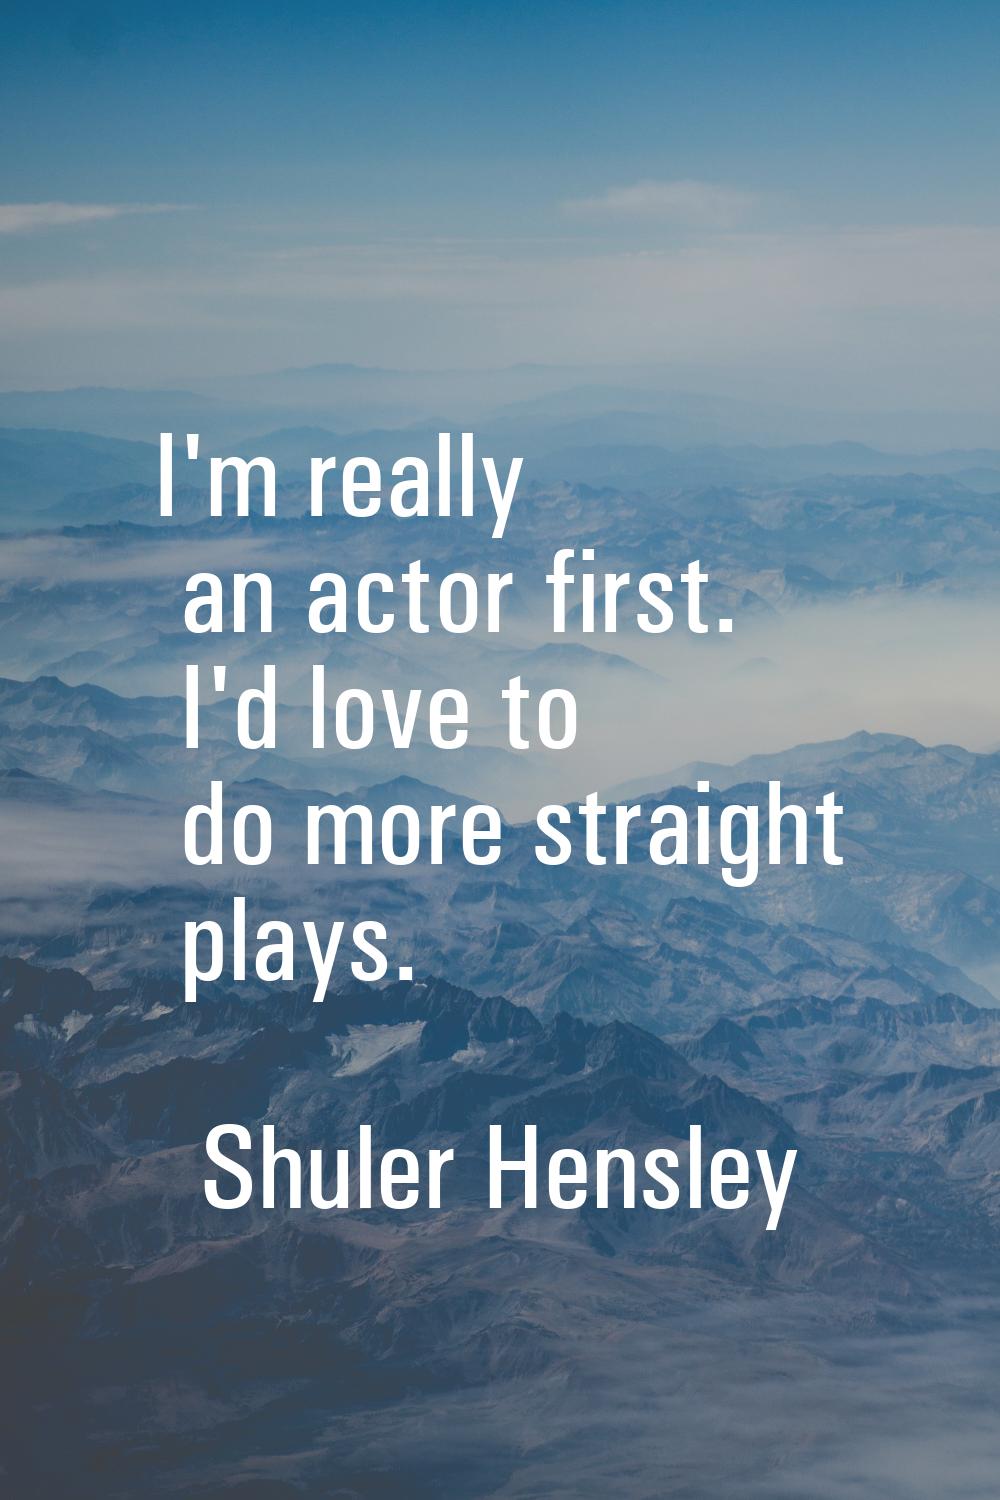 I'm really an actor first. I'd love to do more straight plays.